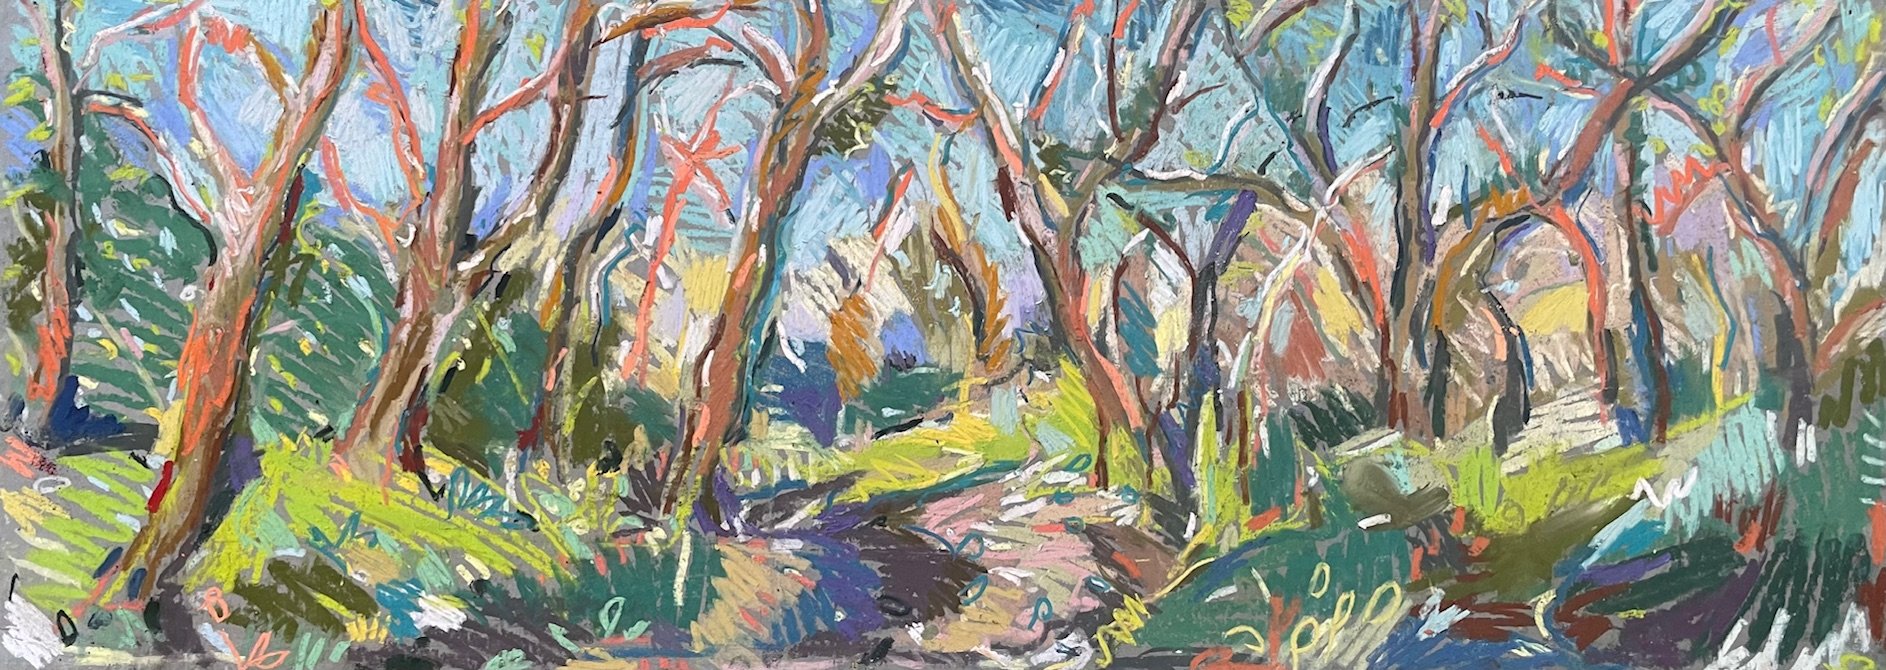 The woods of fairytales, pastel on card, 30x81cm, £670